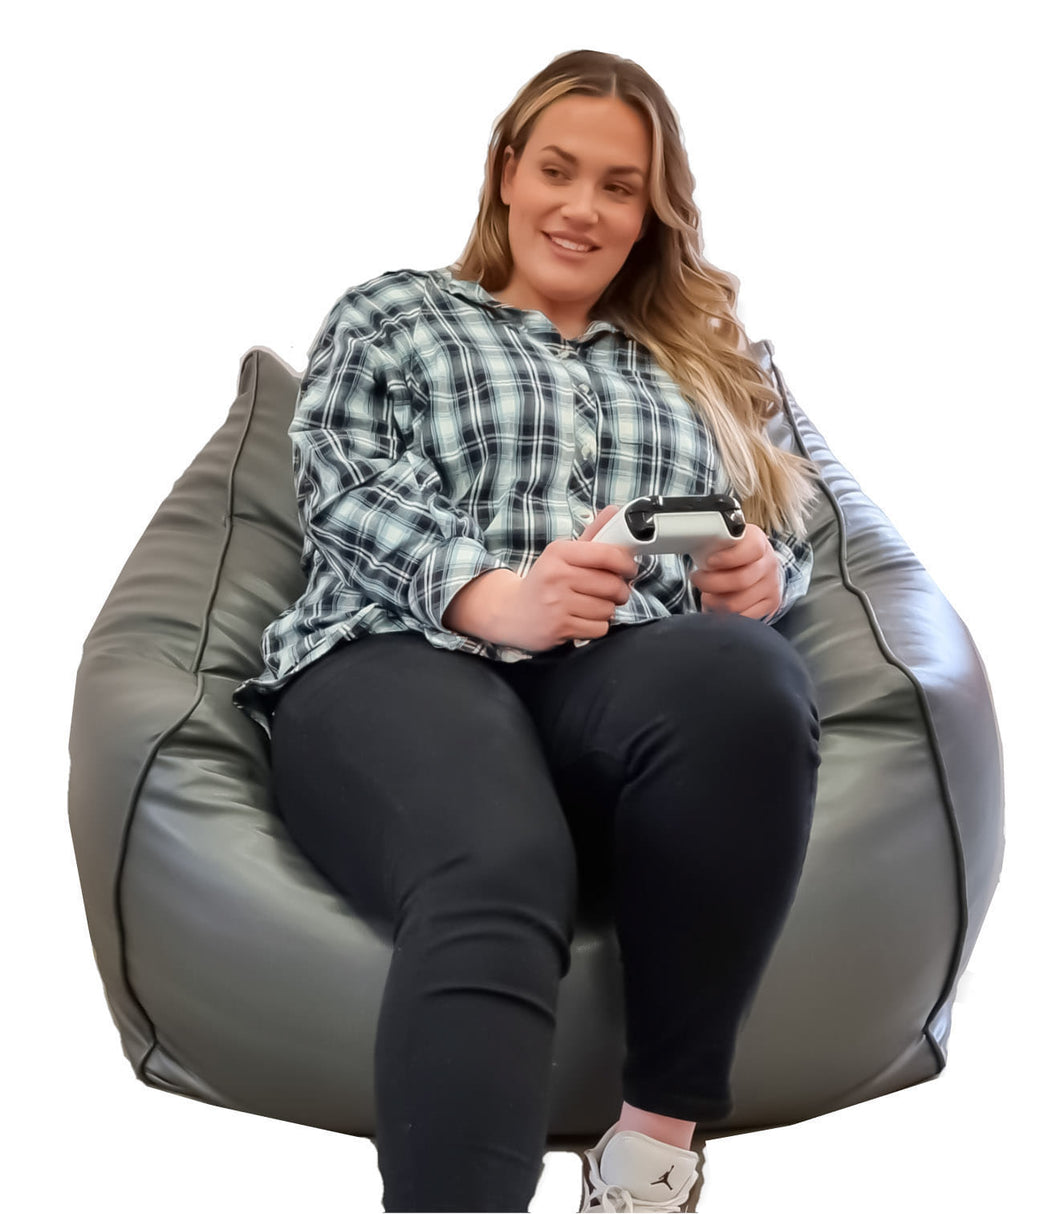 Quad-XXL Gaming Bean Bag Chair - The Comfiest and Widest Gaming Sofa for Large Adults